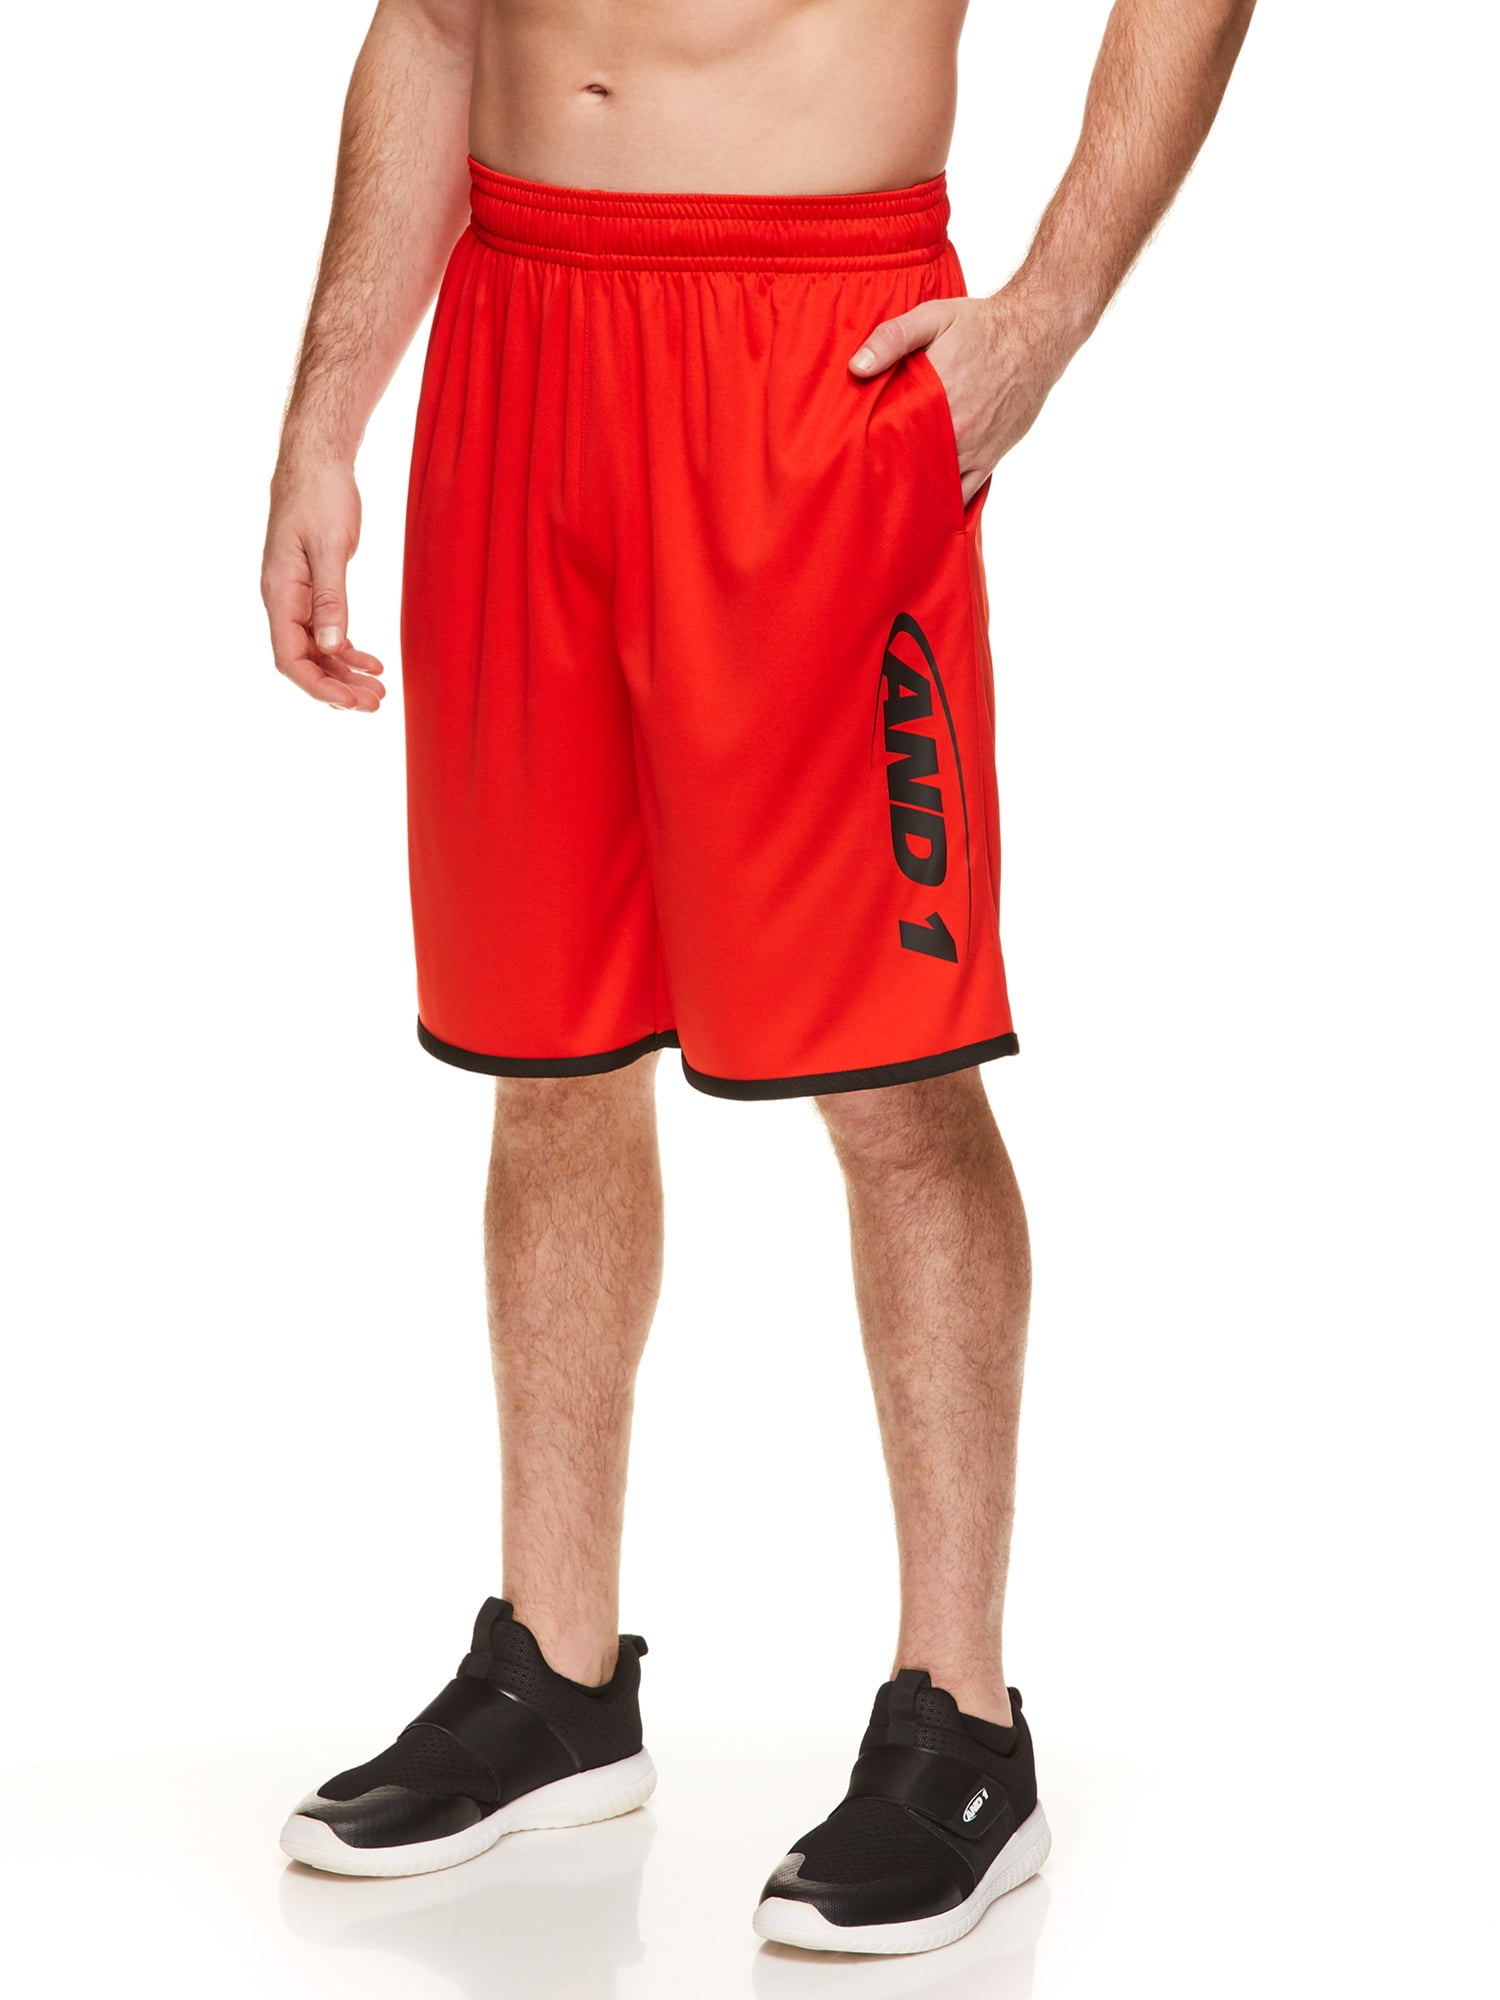 AND1 - AND1 Men's New Generation Classic Basketball Shorts, up to 2XL